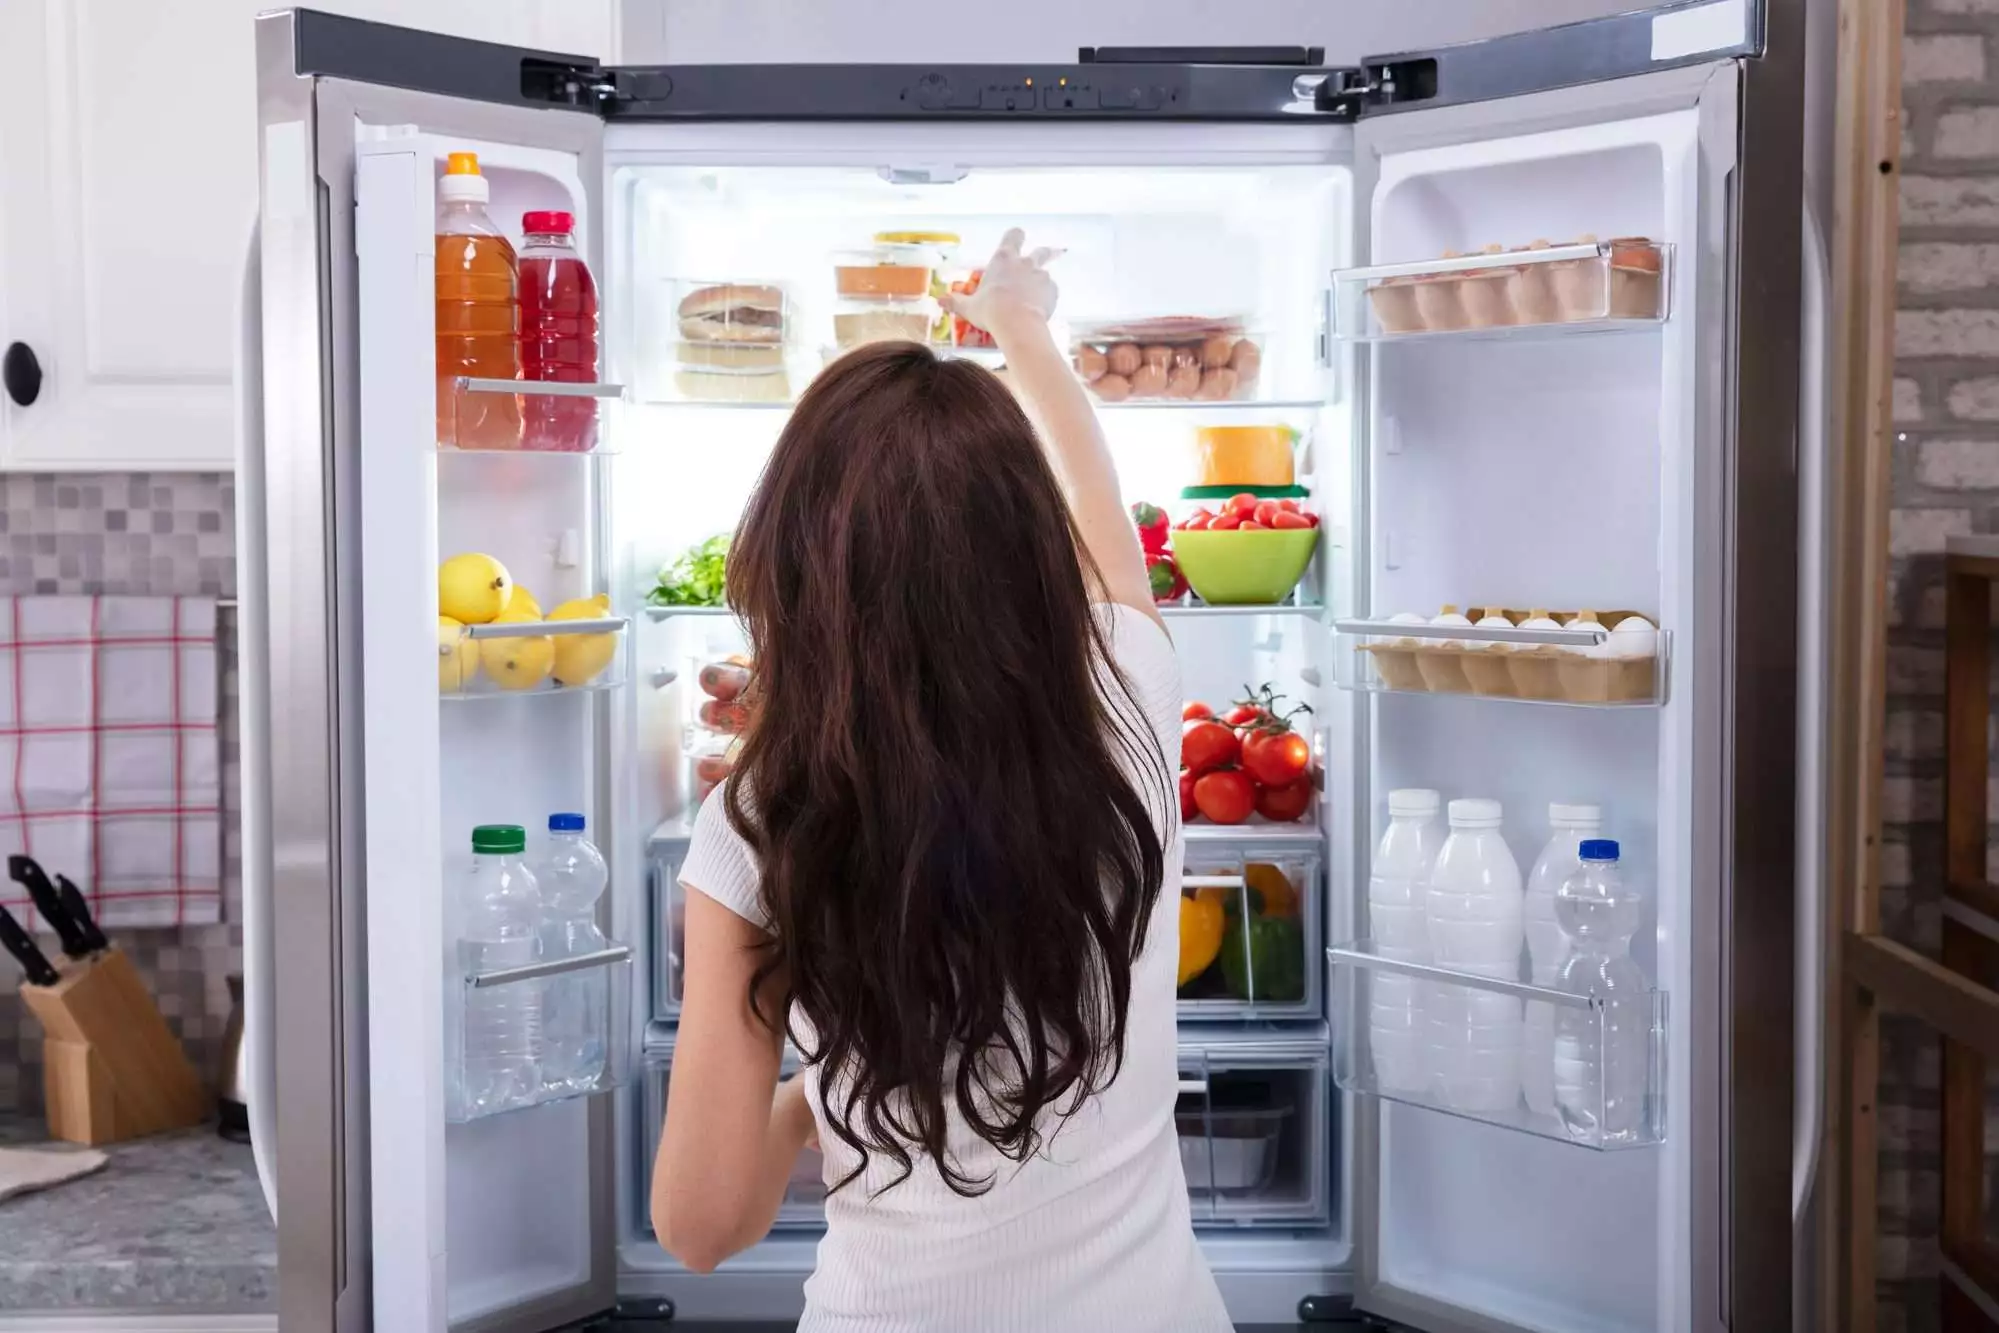 Rear View Of A Young Woman Taking Food To Eat From Refrigerator